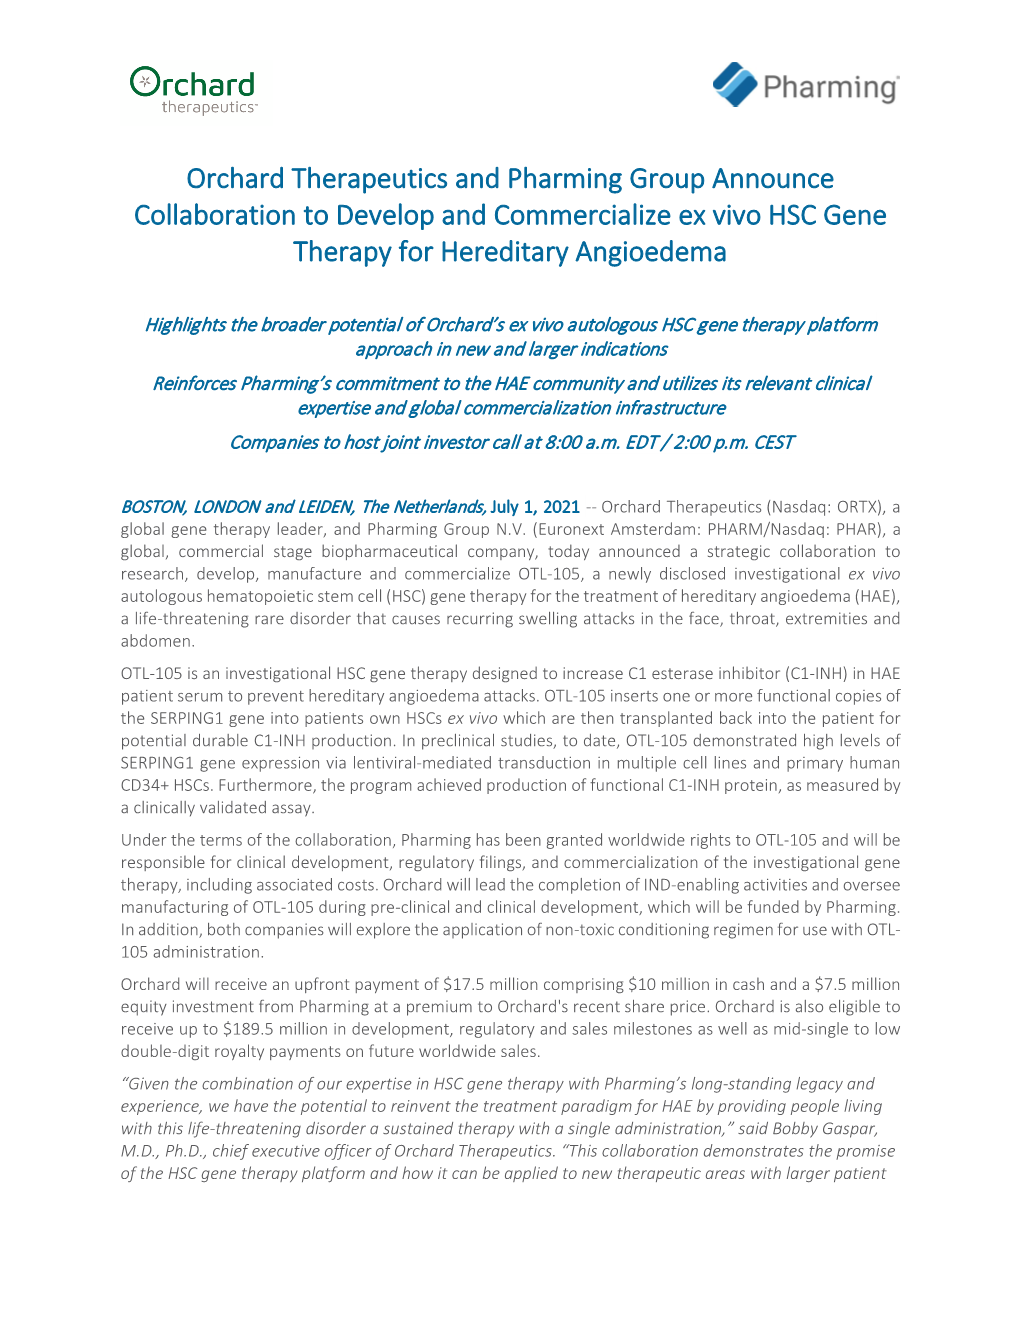 Orchard Therapeutics and Pharming Group Announce Collaboration to Develop and Commercialize Ex Vivo HSC Gene Therapy for Hereditary Angioedema